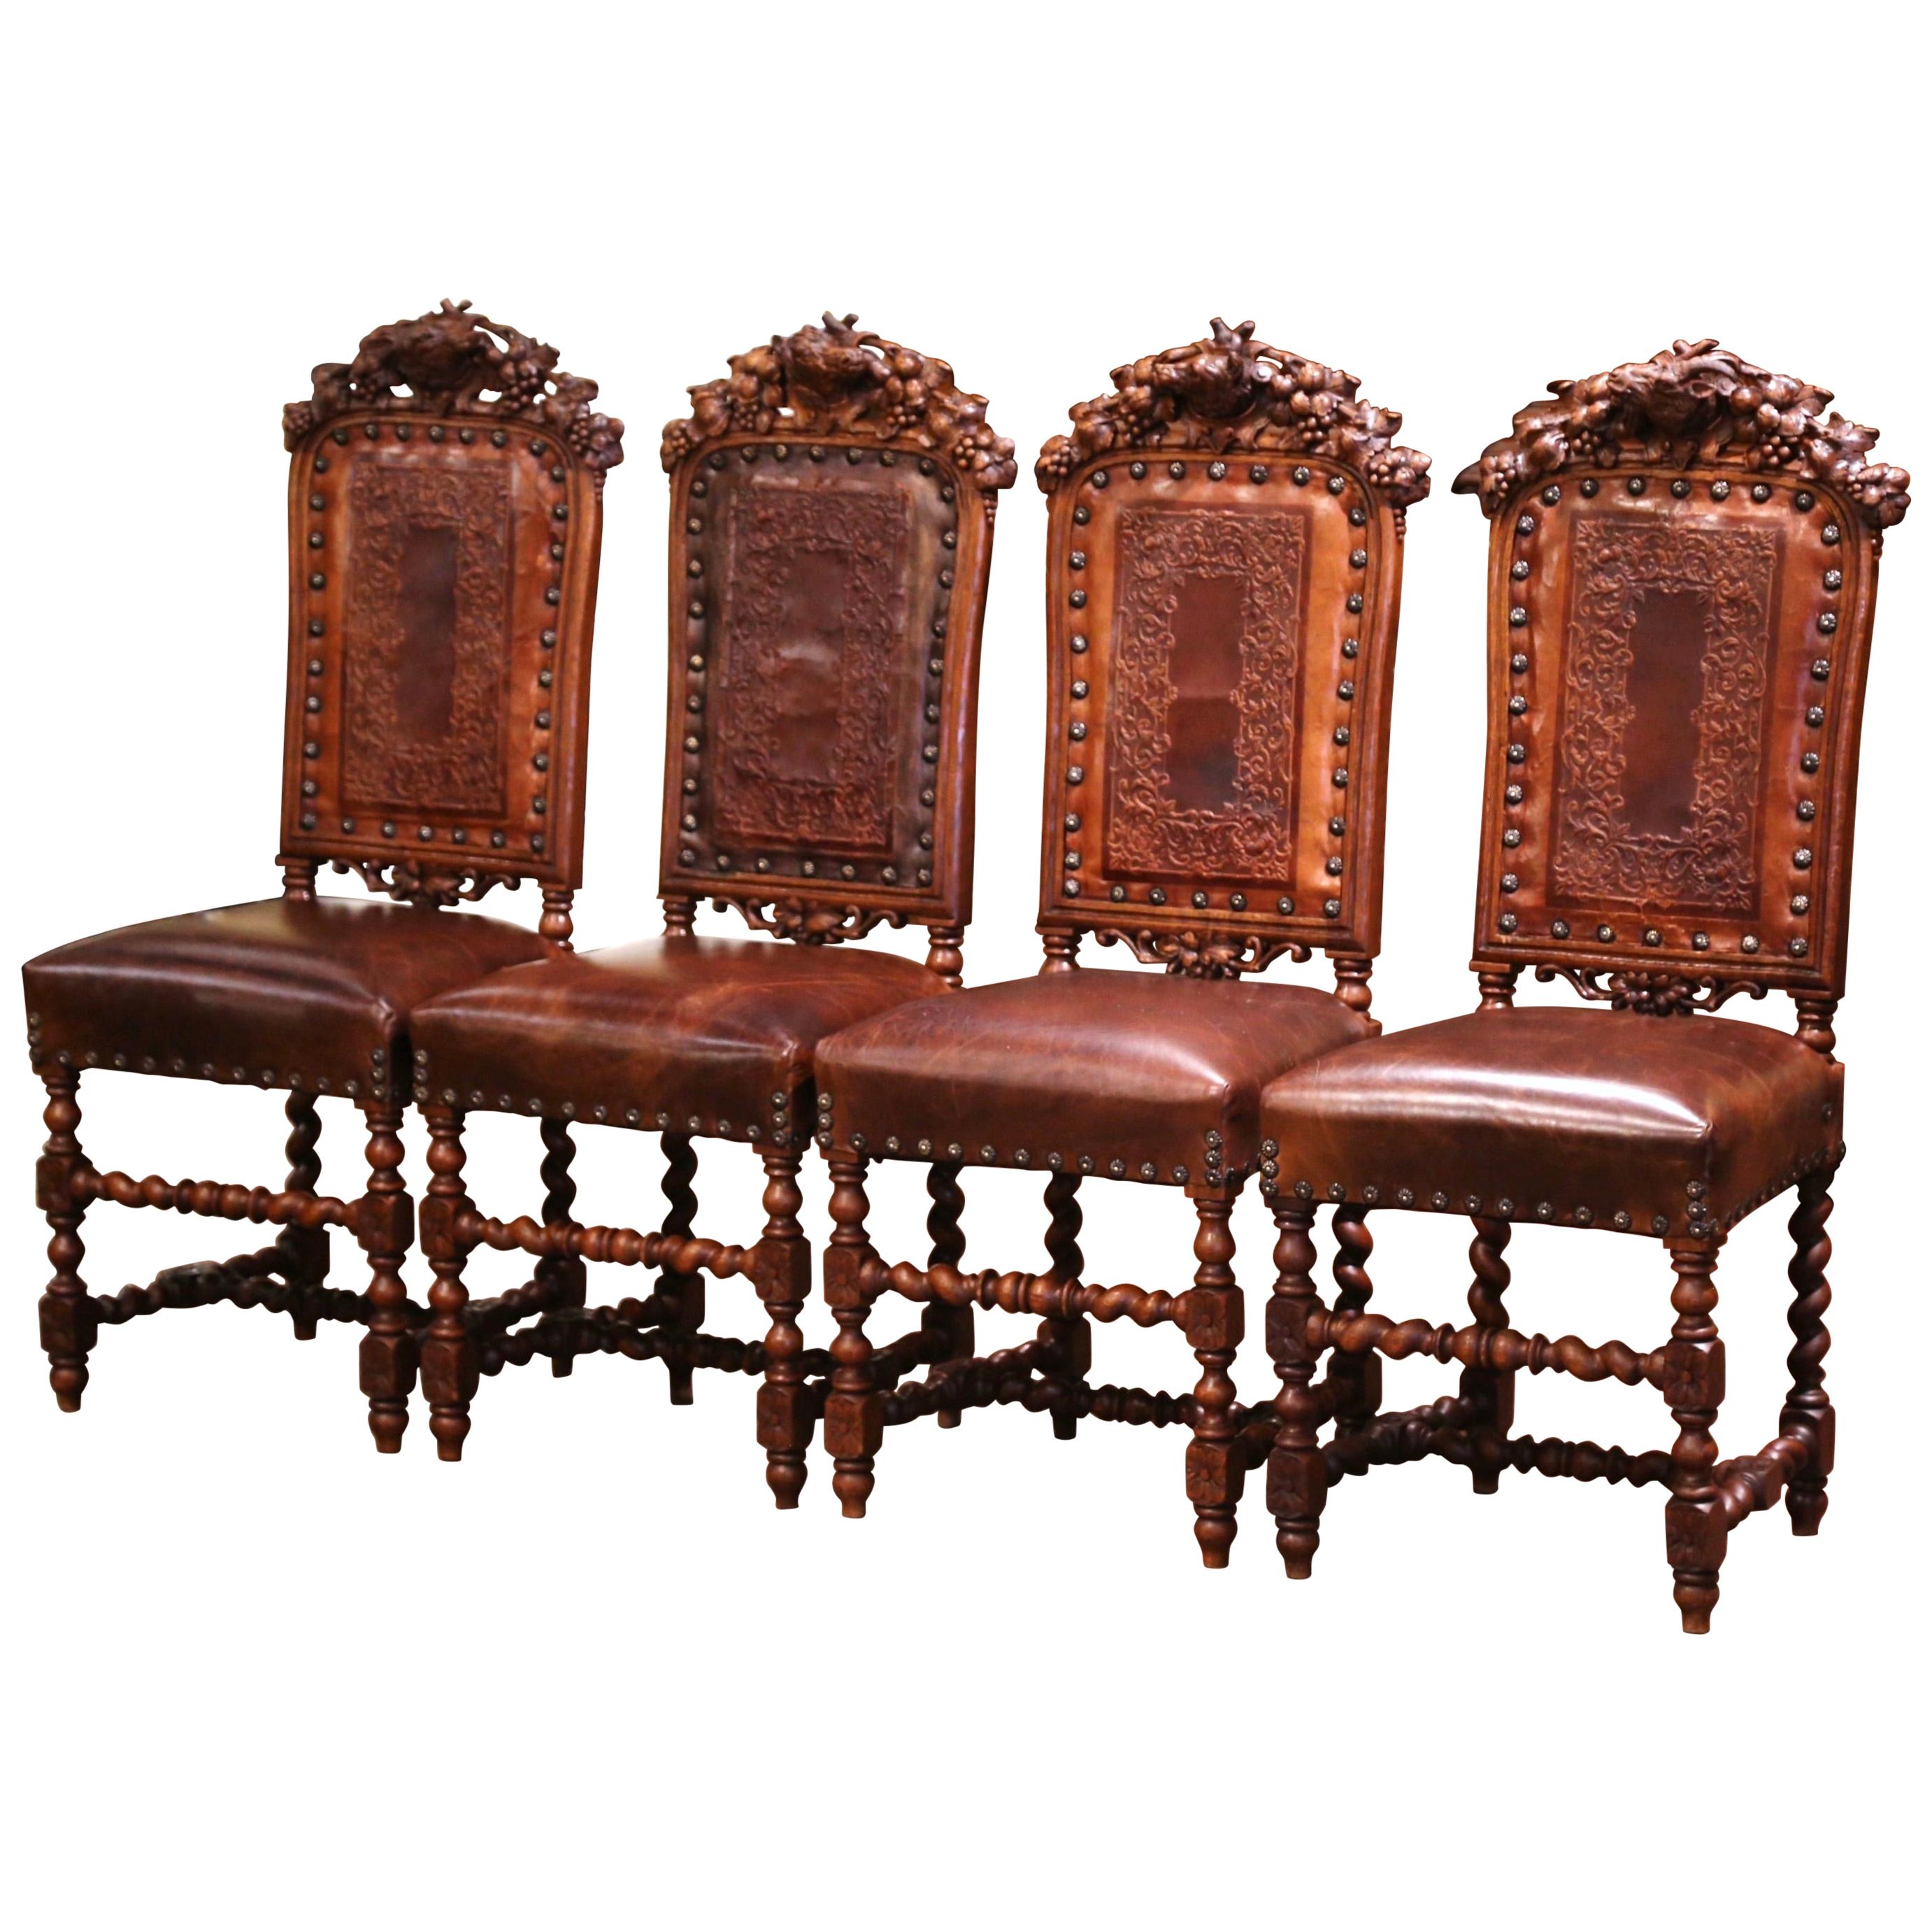 Set of Four 19th Century French Carved Oak and Leather Chairs with Hunt Motifs